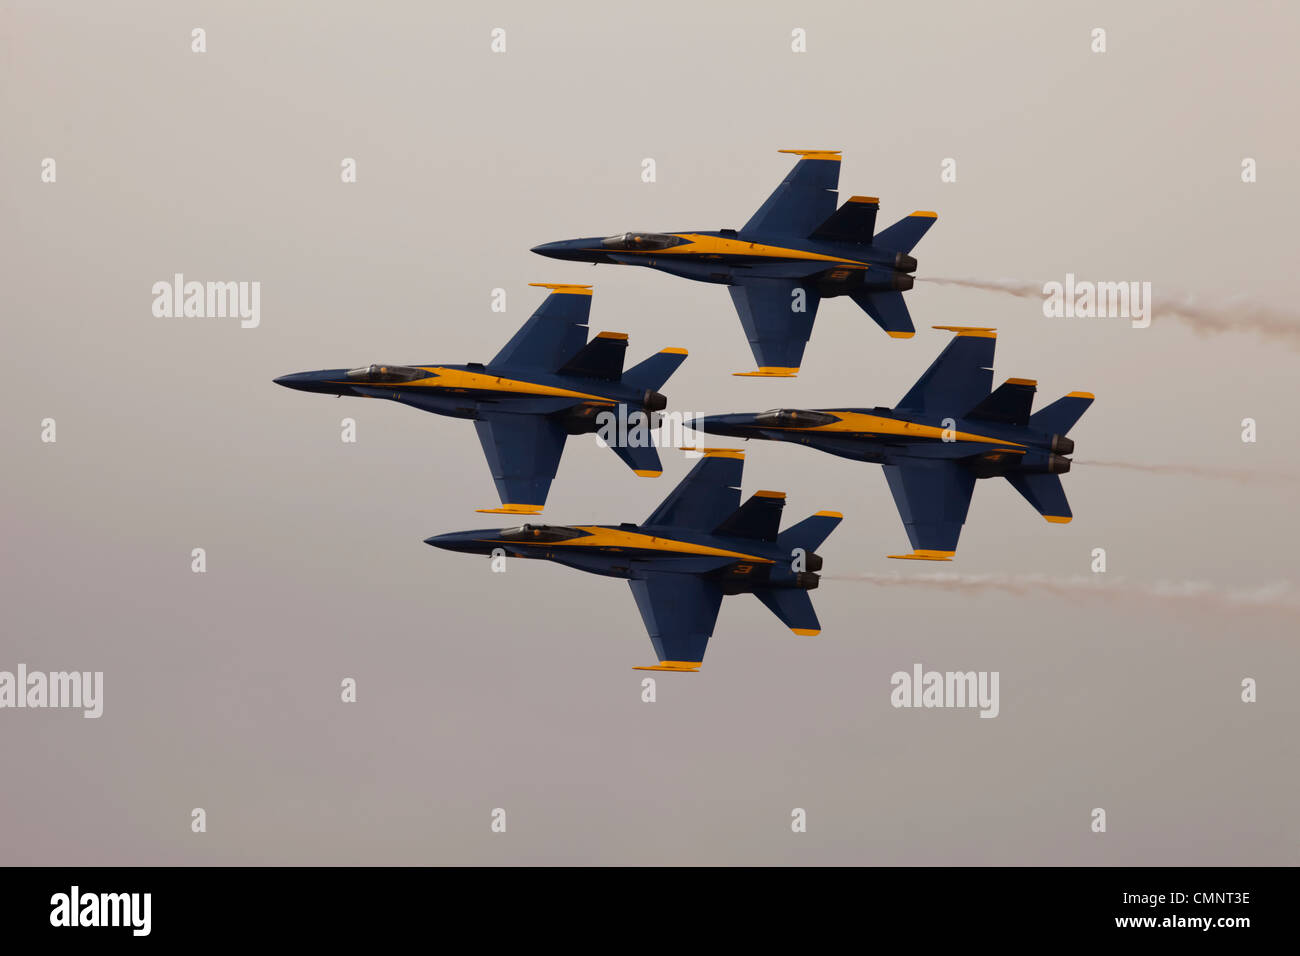 US Navy Blue Angle air superiority F-18 Hornet jet fighter. Close diamond formation against storm cloud. Stock Photo